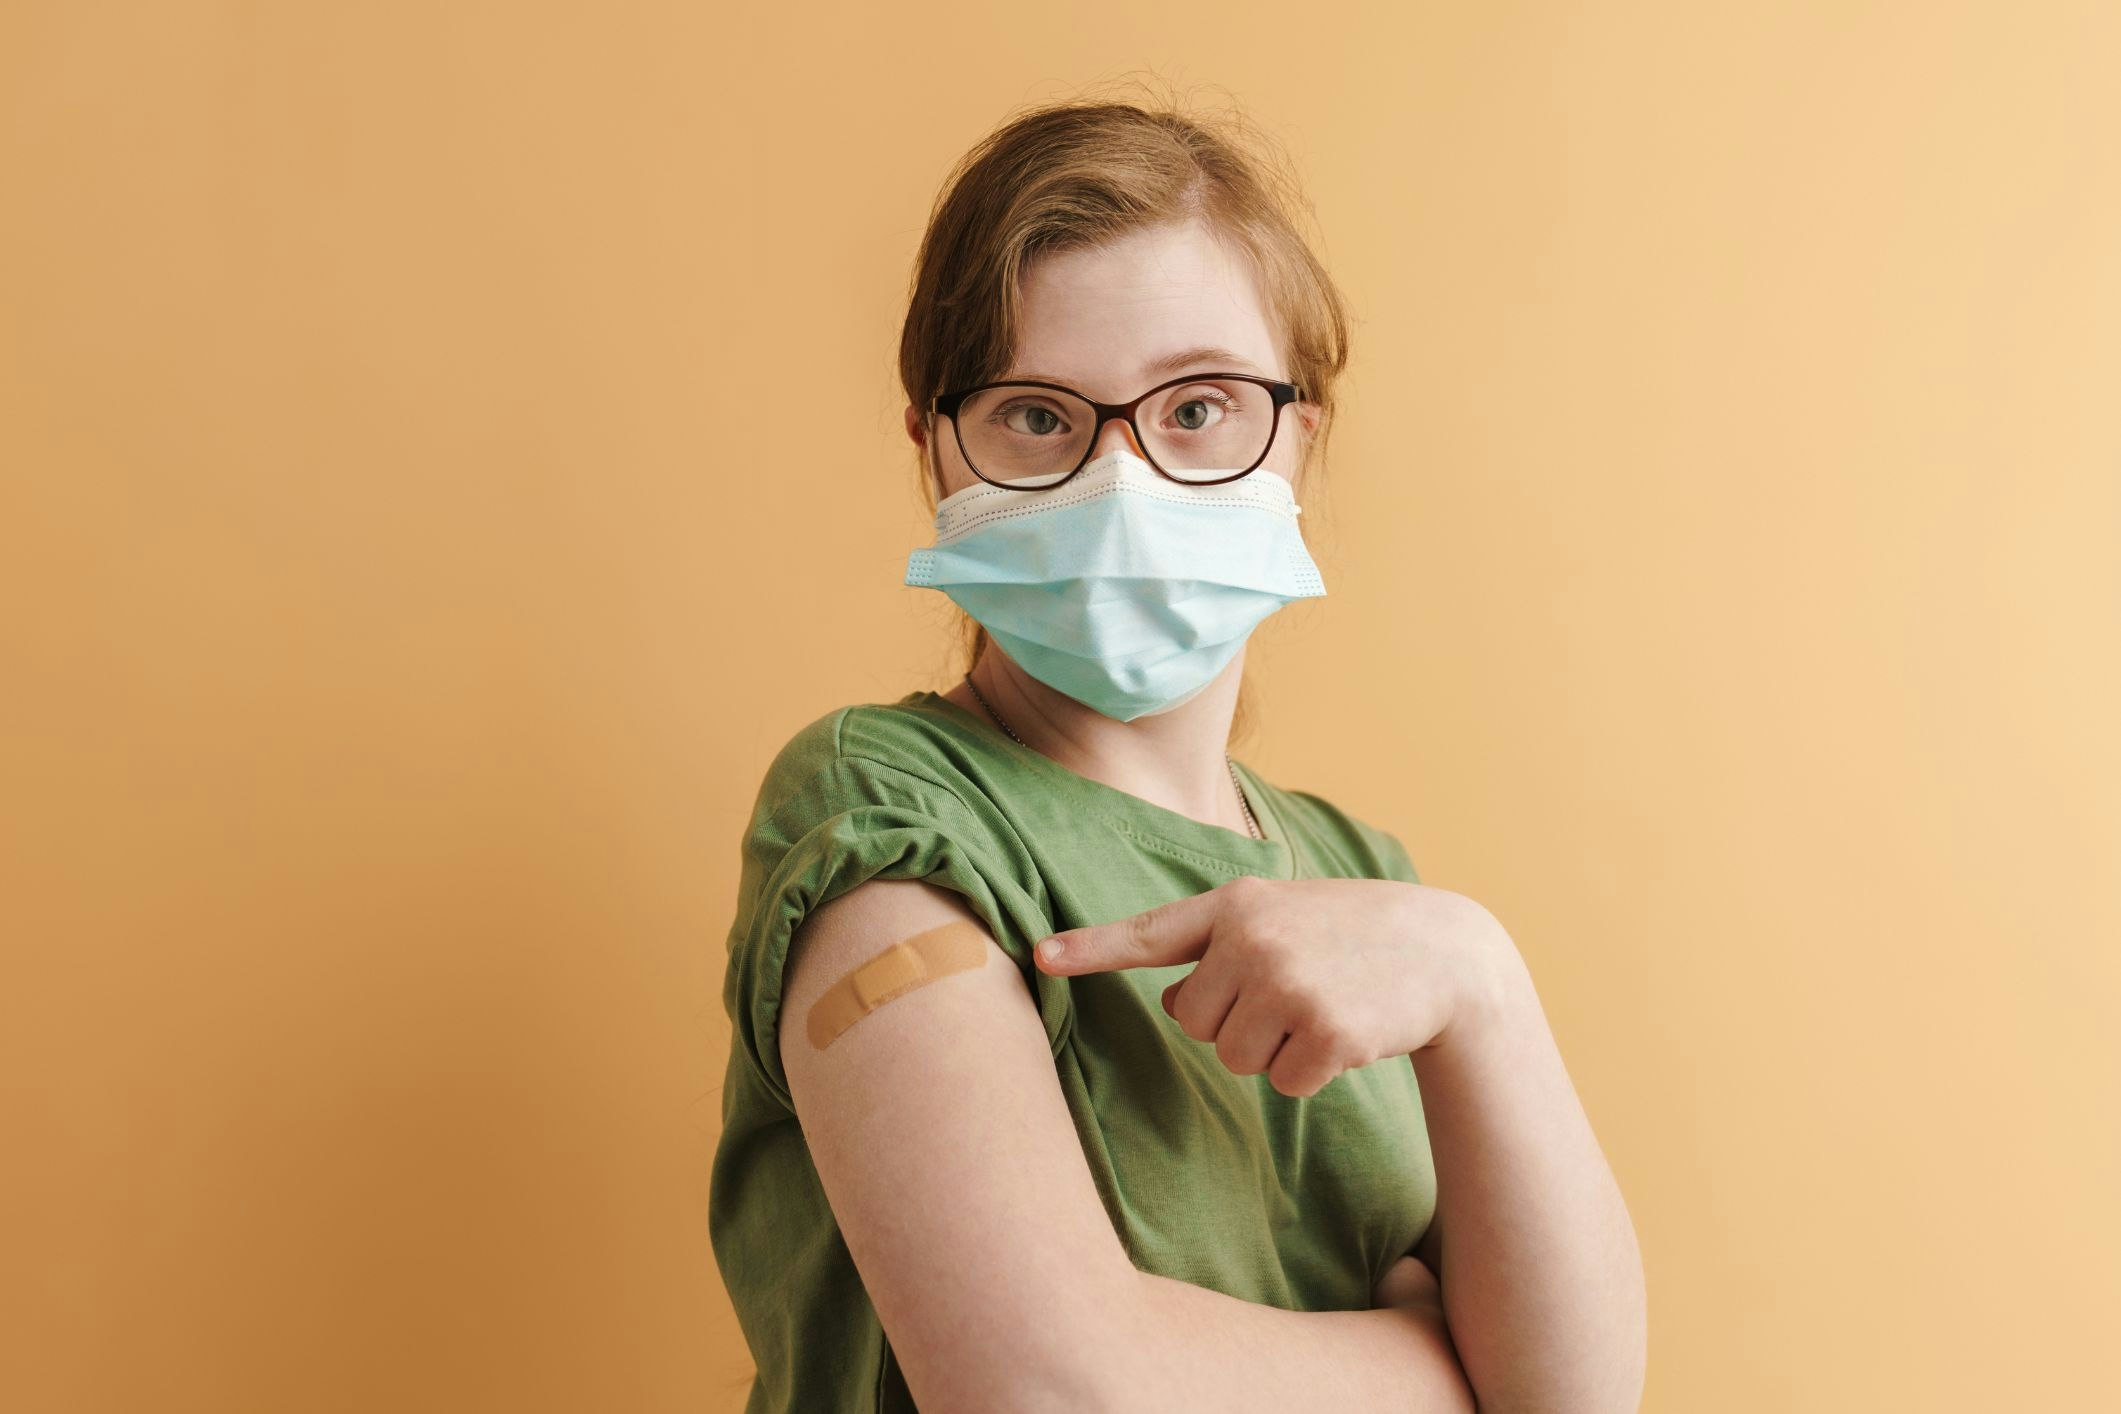 <p>Getting an annual vaccination can help protect you from influenza, but are administration clinics accessible enough for people with disability? [Source: Shutterstock]</p>
